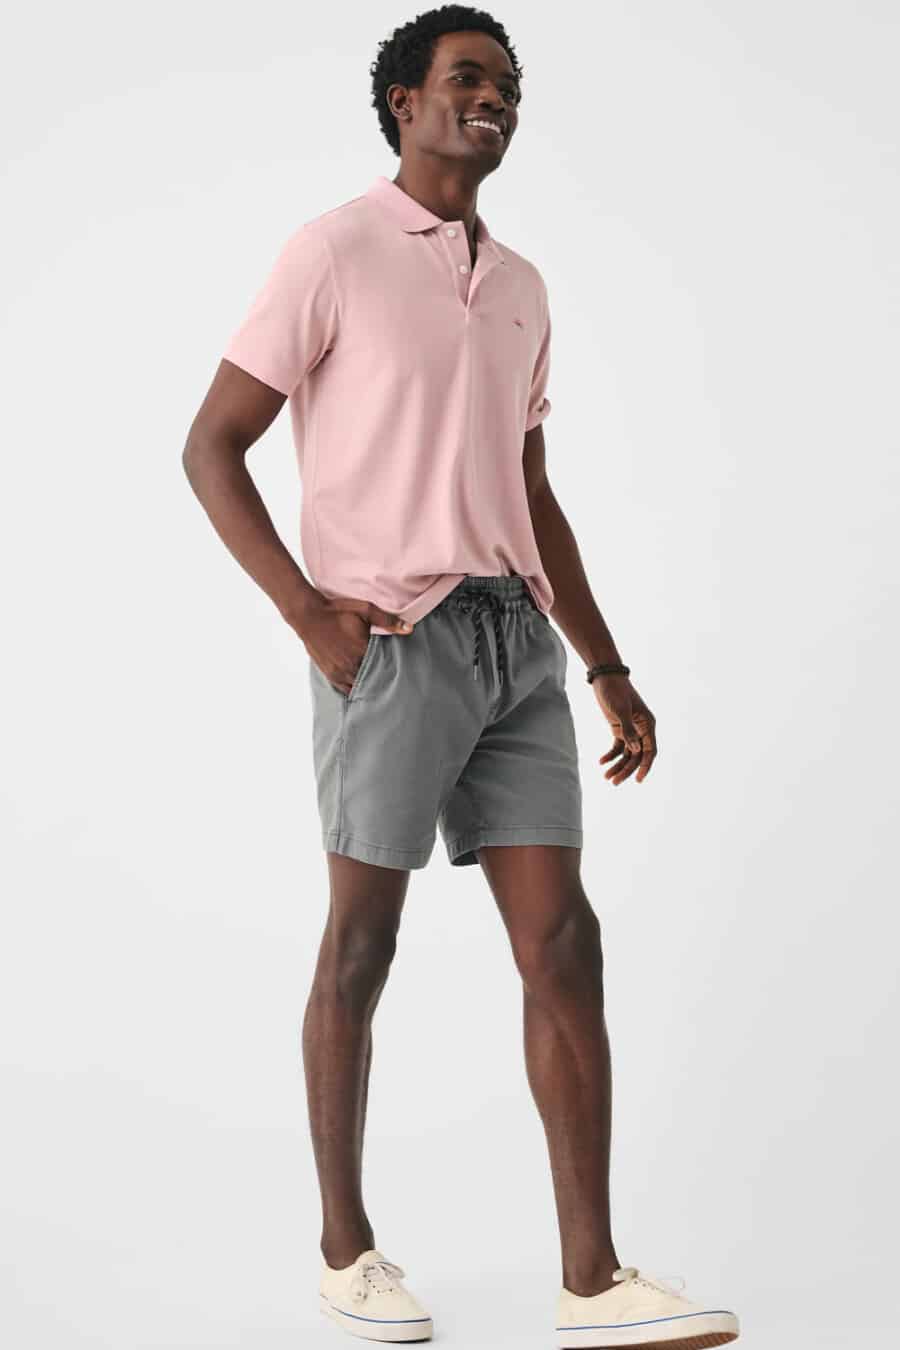 Men's grey drawstring shorts, light pink polo shirt and cream skate shoe sneakers outfit